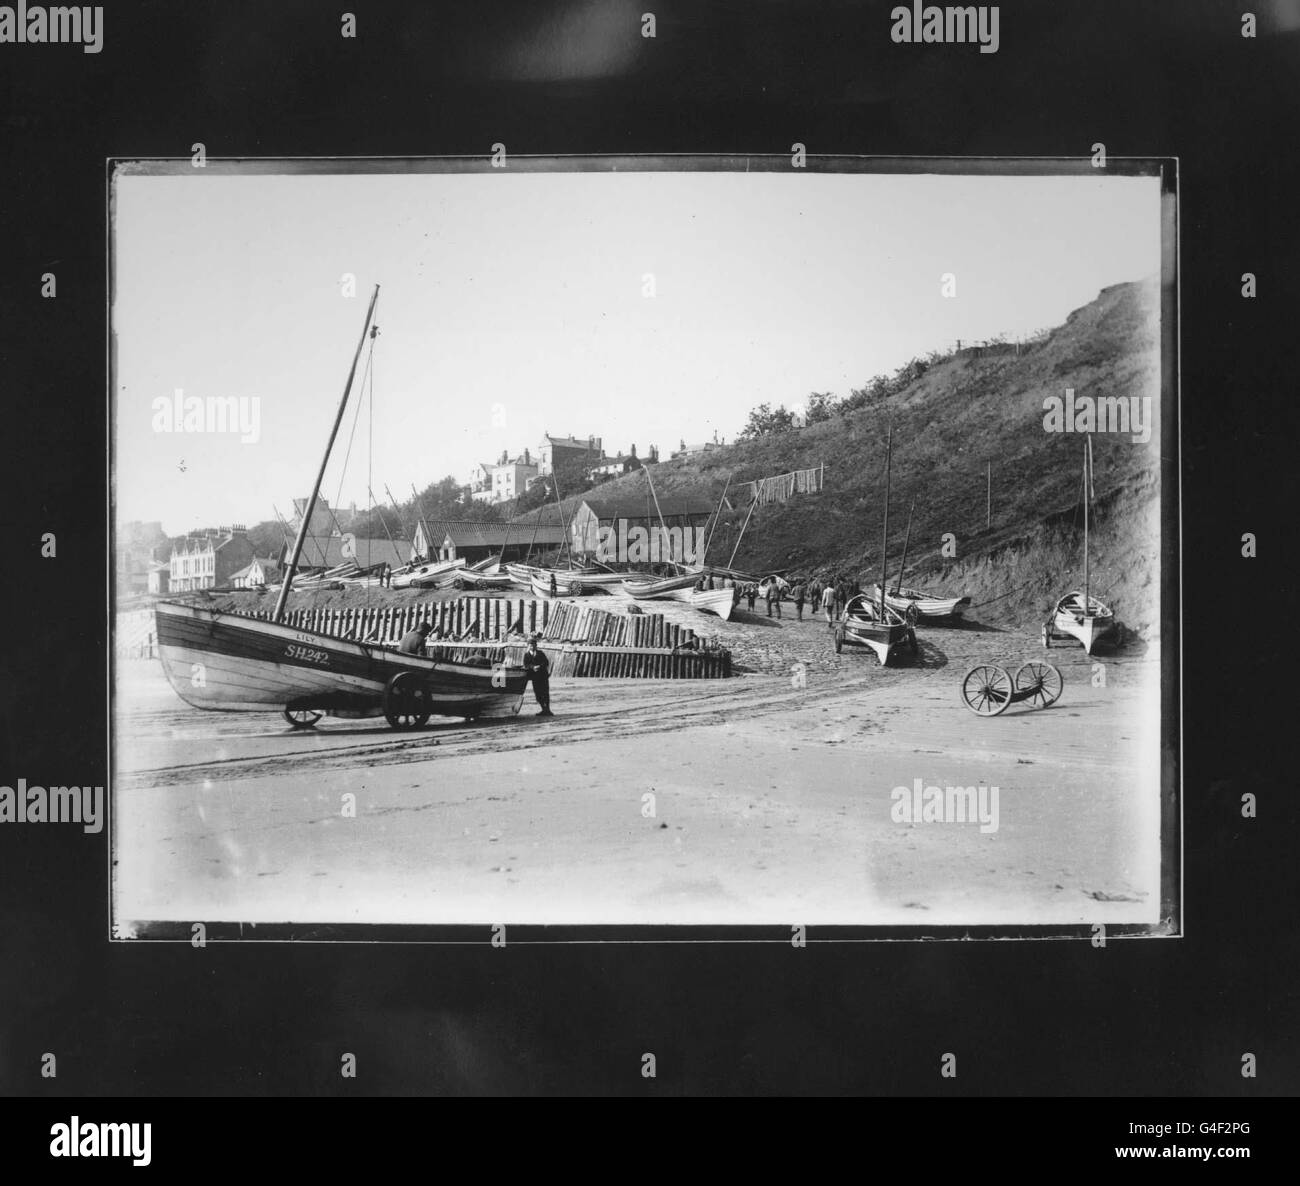 Boats on the foreshore at Filey taken on August 24th 1900 at 9.20 am, the exposure was one twenty fifth of a second - at f16.A treasure trove of Victorian photography, hidden for nearly 100 years has been discovered in a garage in Grimsby. The collection of high quality glass negatives and magic lantern slides, which will be sold with the cameras next week, were shot by Yorkshireman William Wells between 1899 and 1901. PA Photos. See PA story SOCIAL Photos Stock Photo